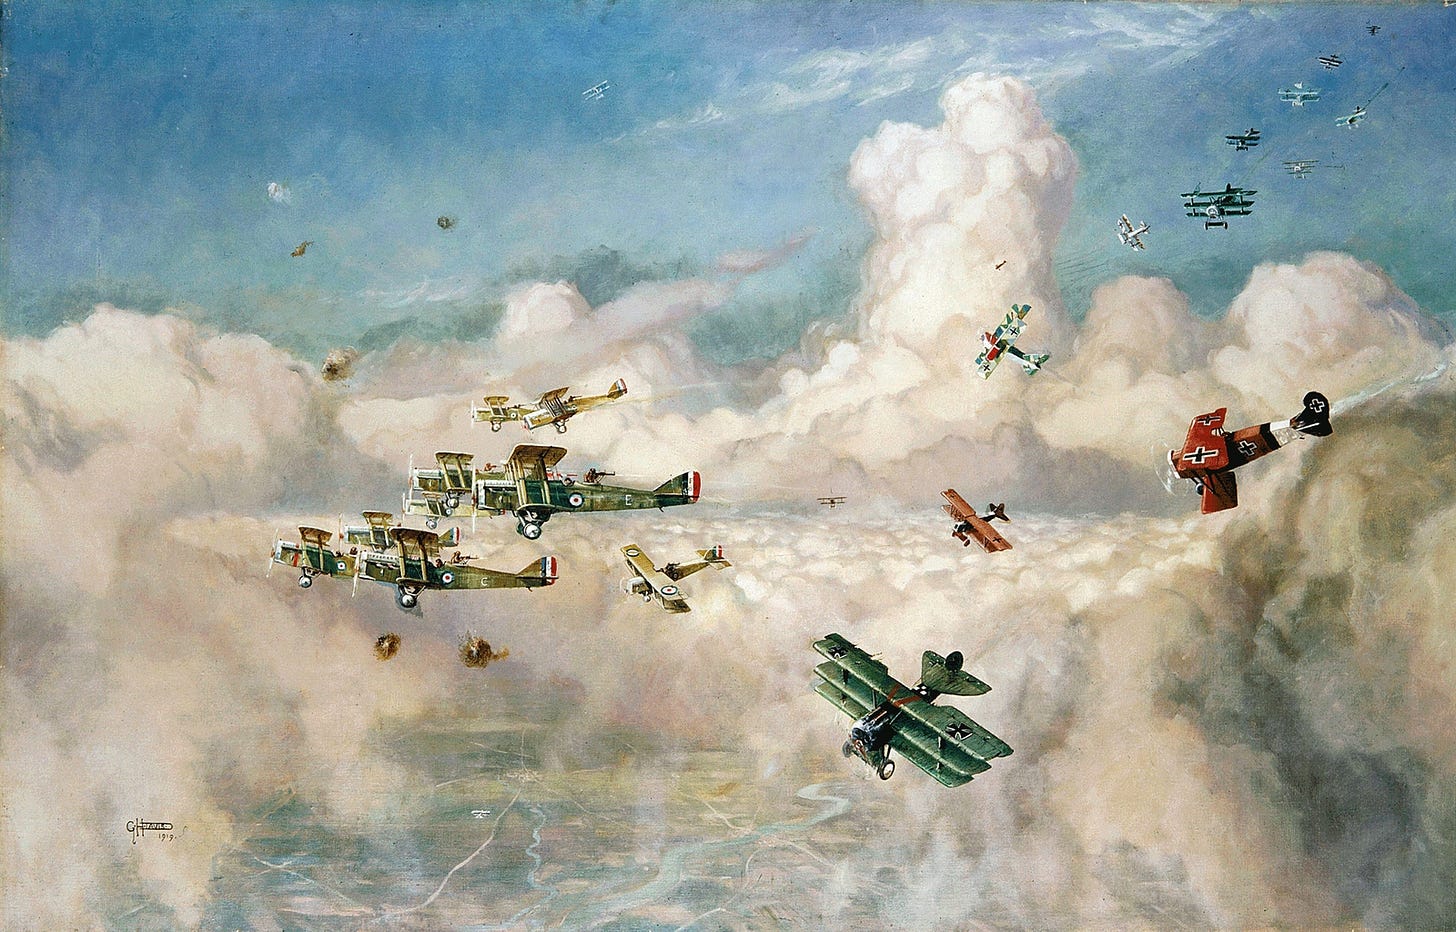 Horace Davis’s 1919 painting shows German fighters pursuing British DH.9A biplanes flying in a tight defensive ...